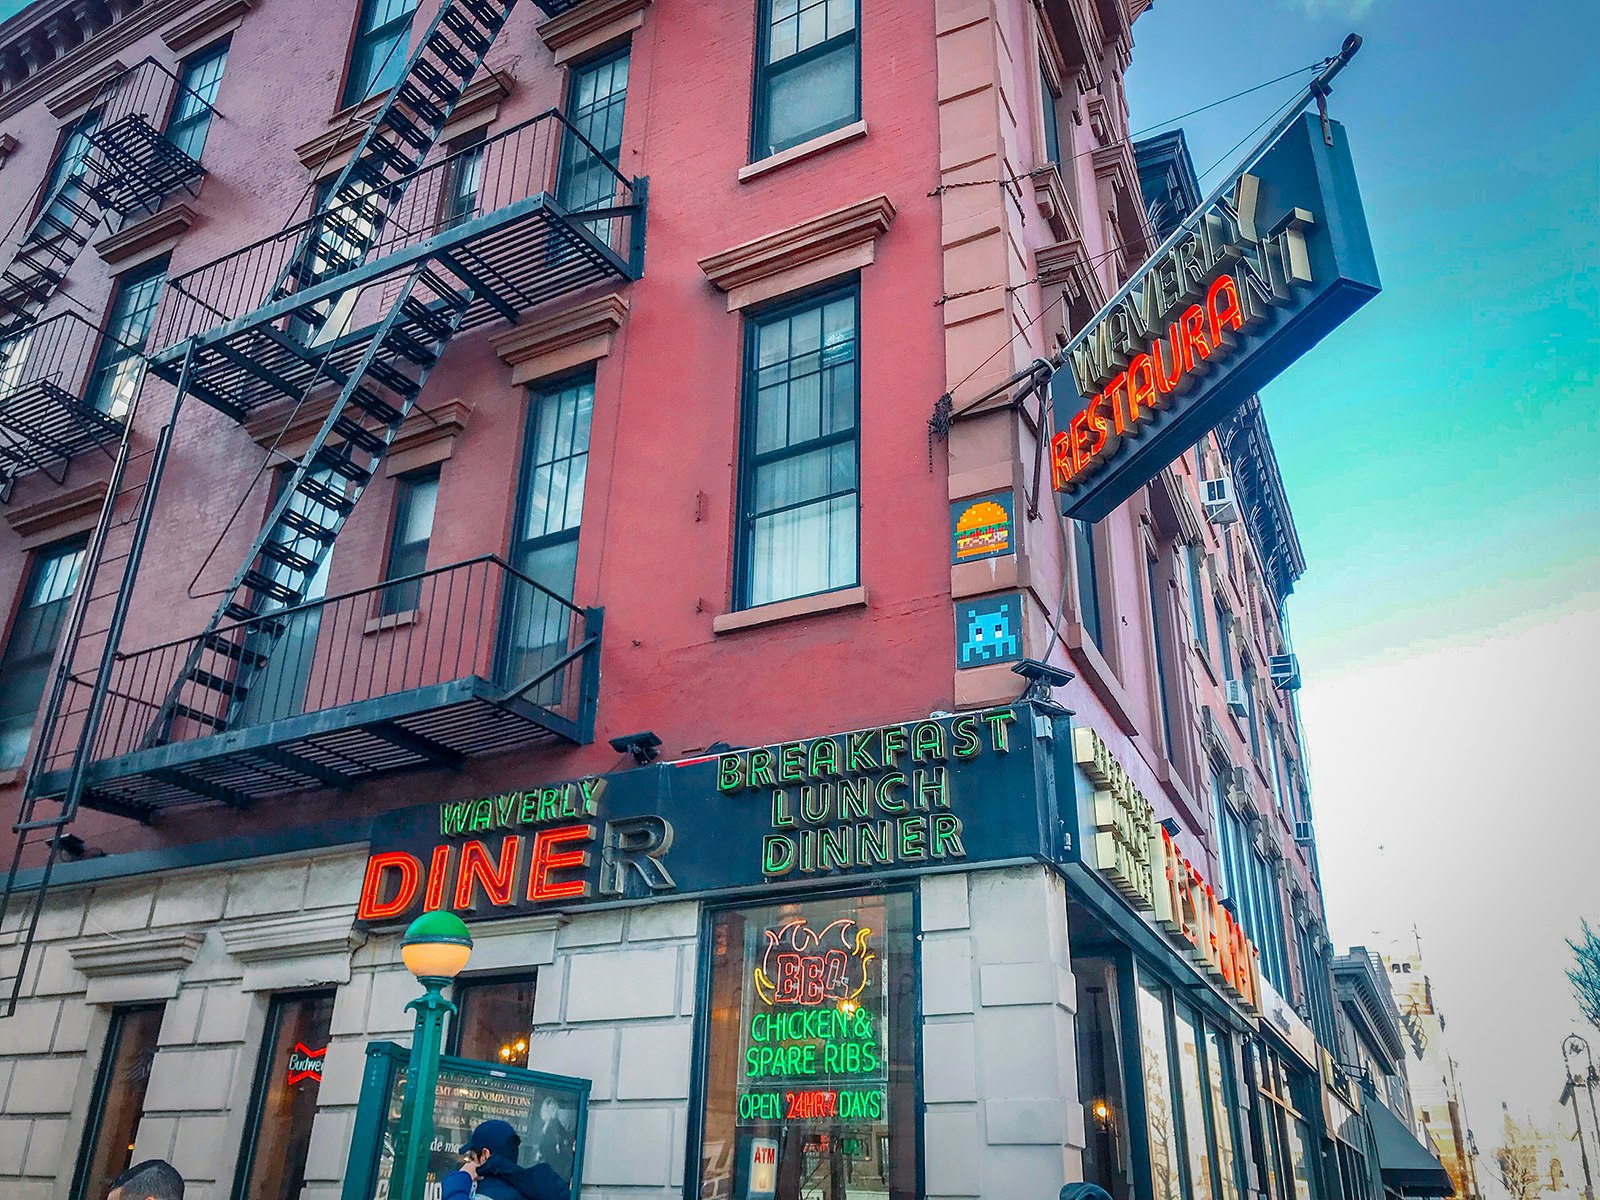 A photo of a diner on a corner in New York City, with neon signs and fire-escapes visible. 